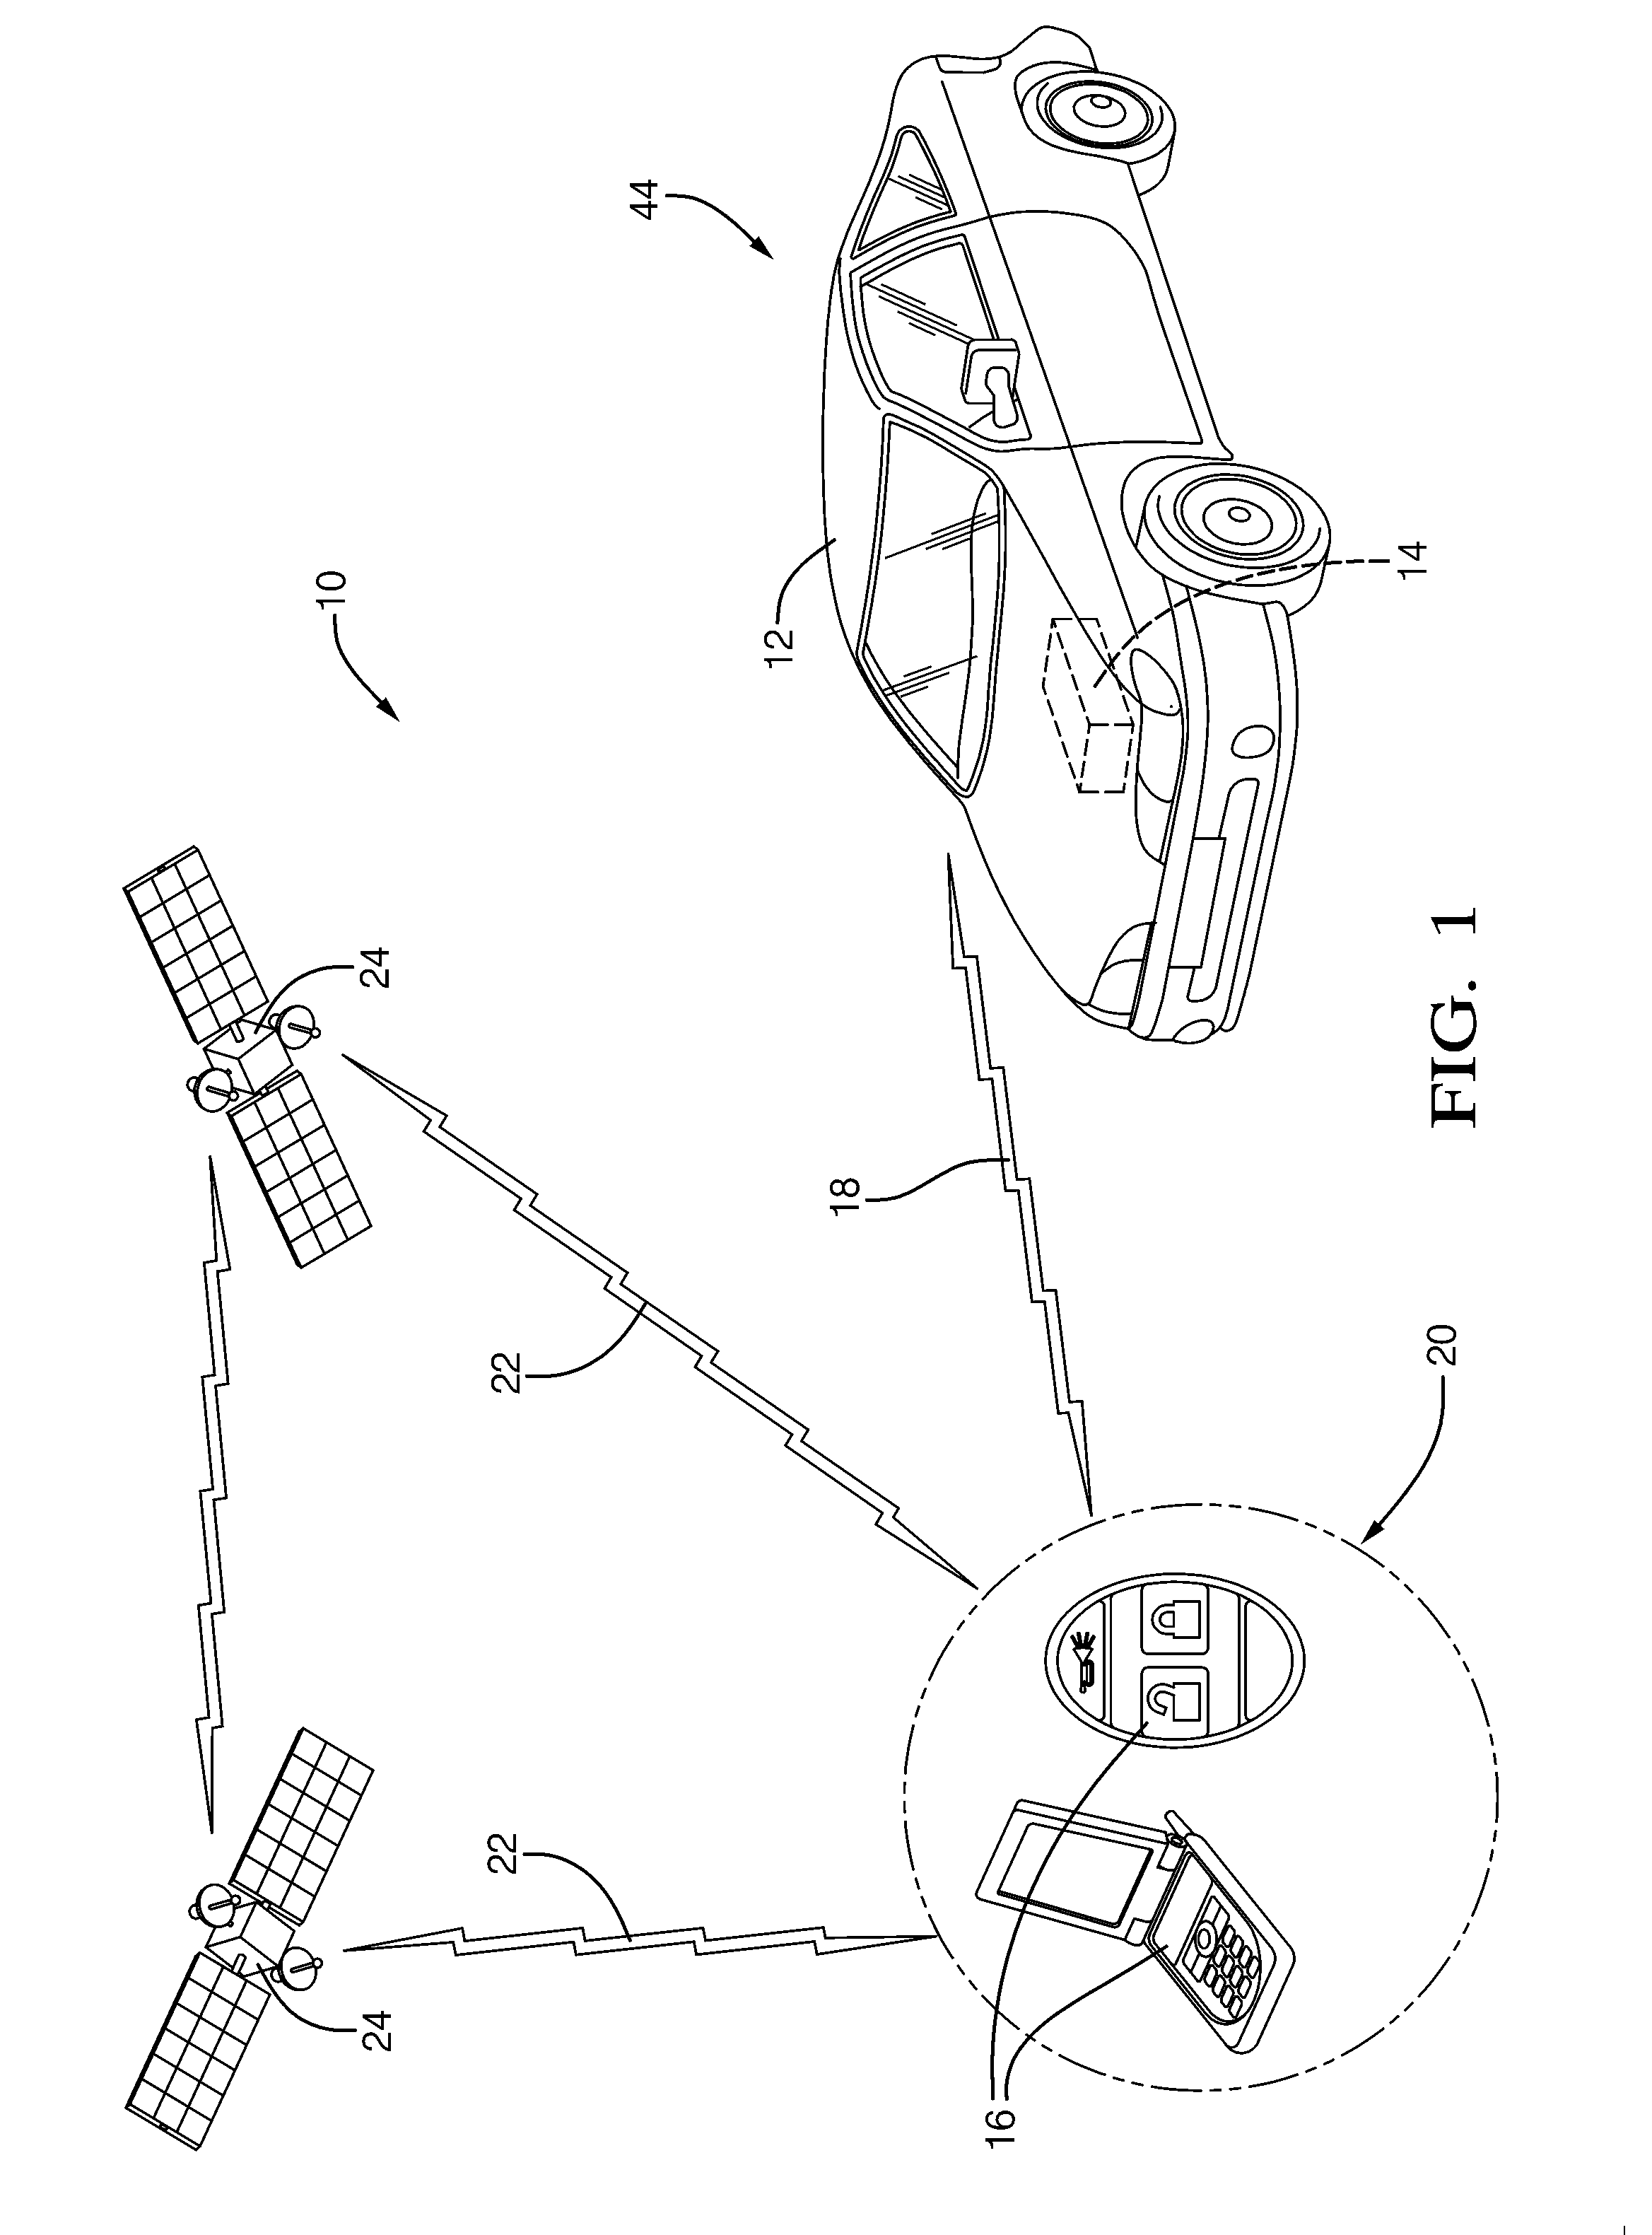 Vehicle security system and method of operation based on a nomadic device location